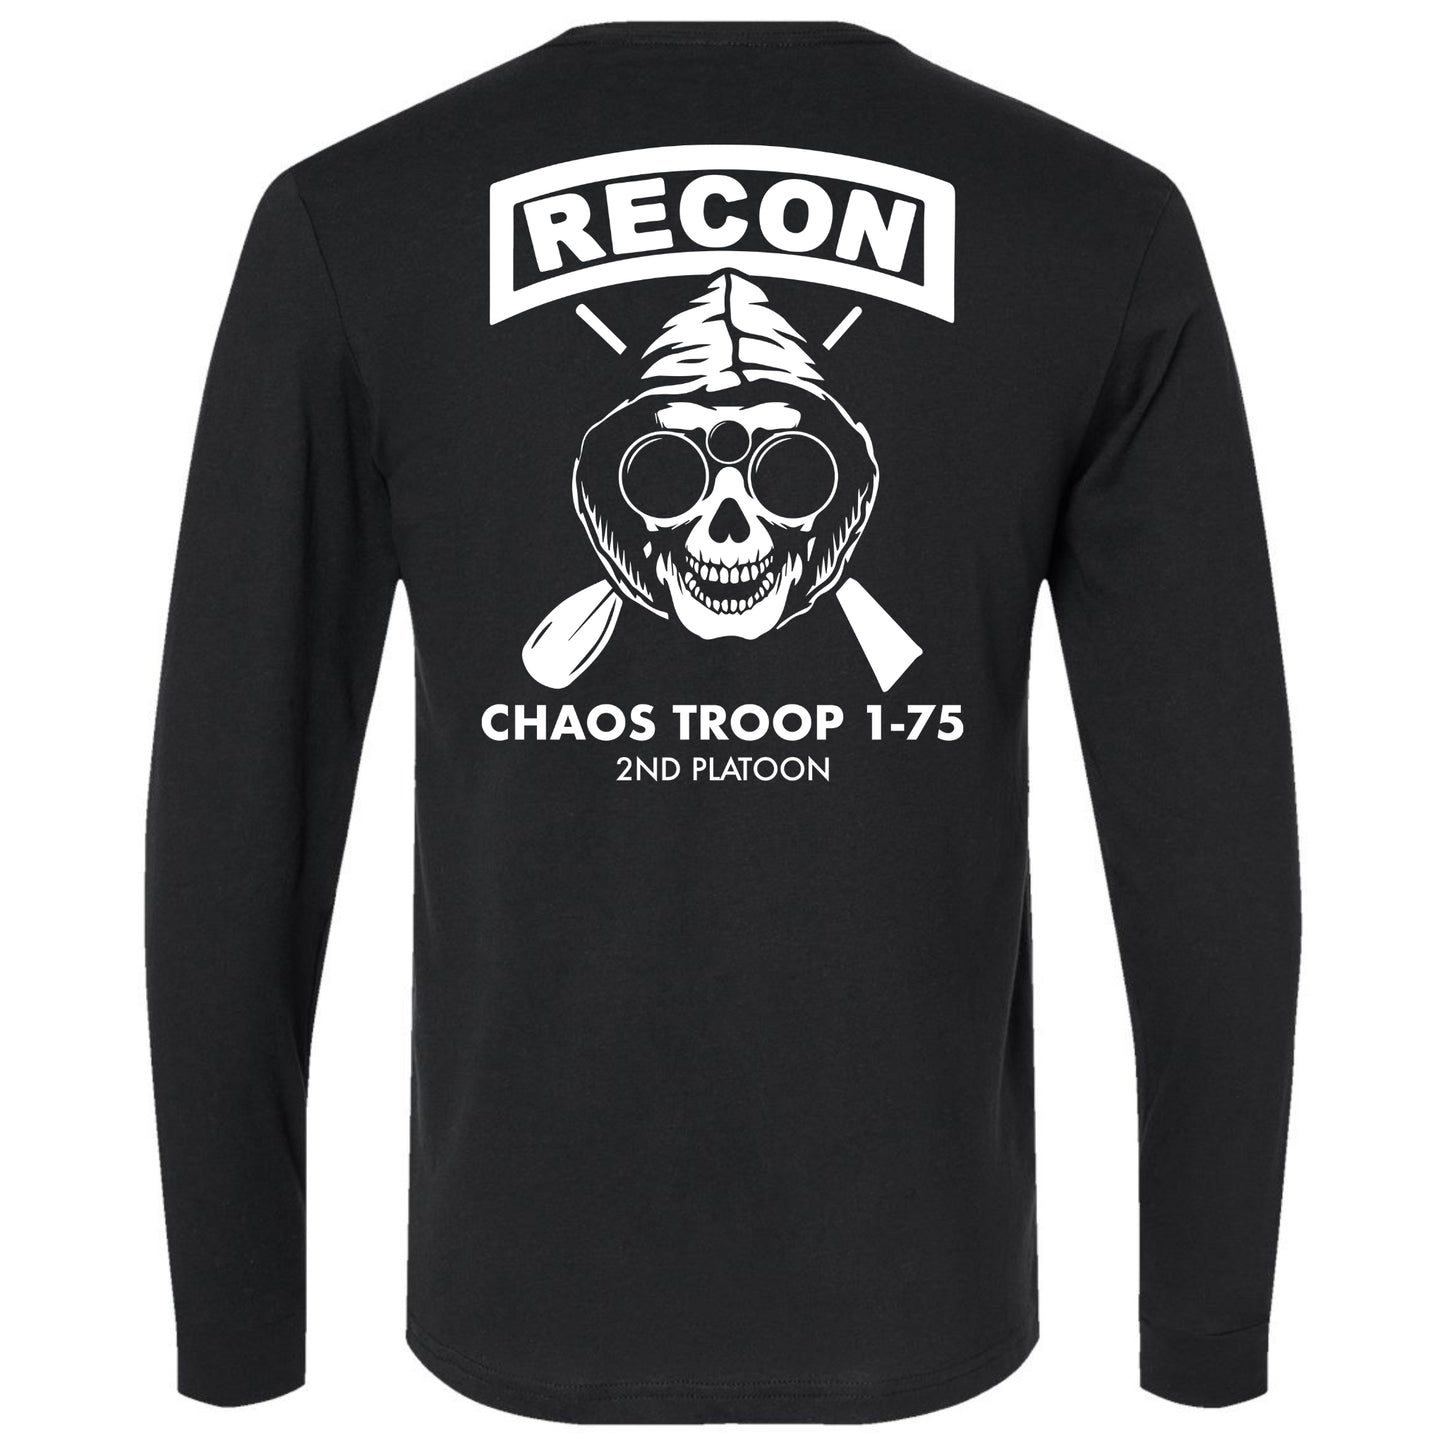 Chaos Recon Next Level Long Sleeve Blend Tee